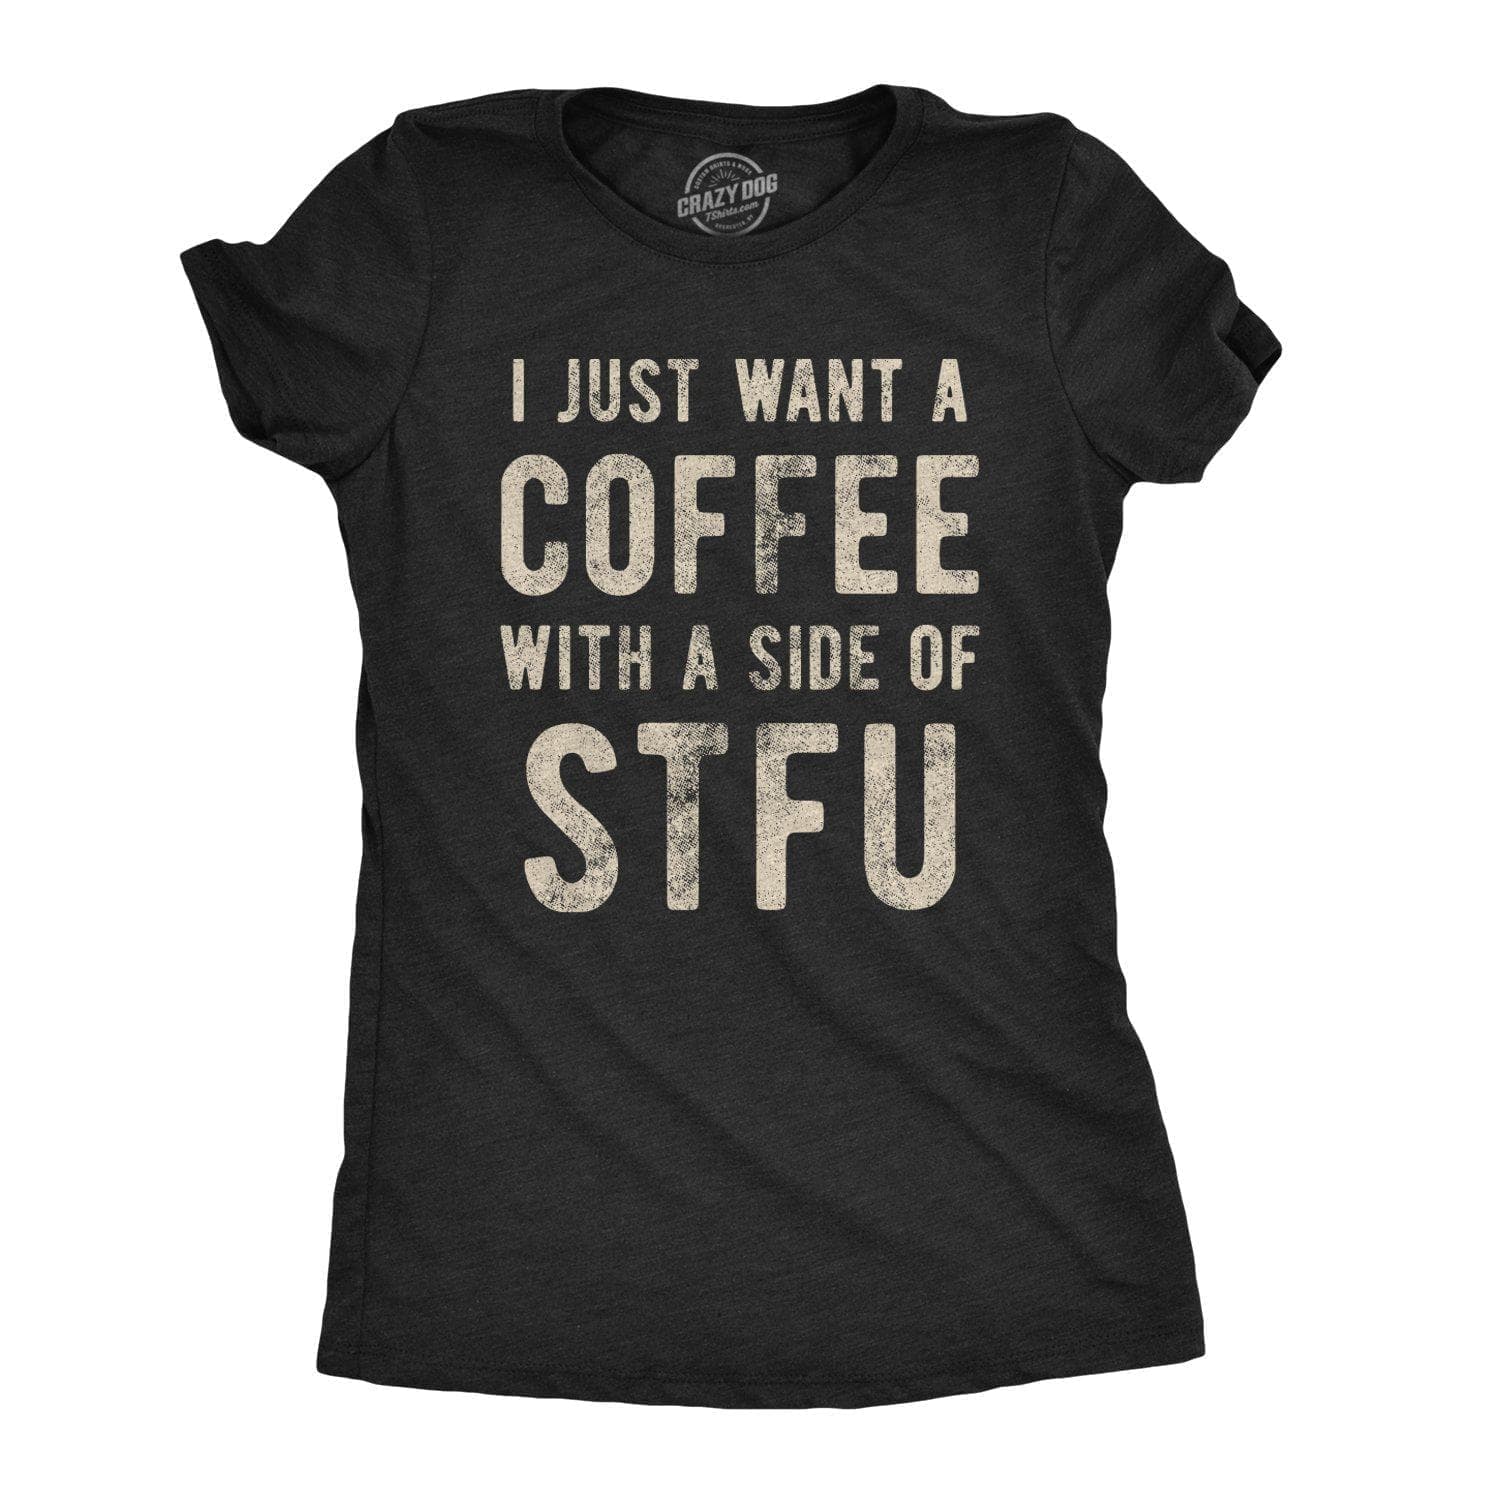 I Just Want A Coffee With A Side of STFU Women's Tshirt - Crazy Dog T-Shirts